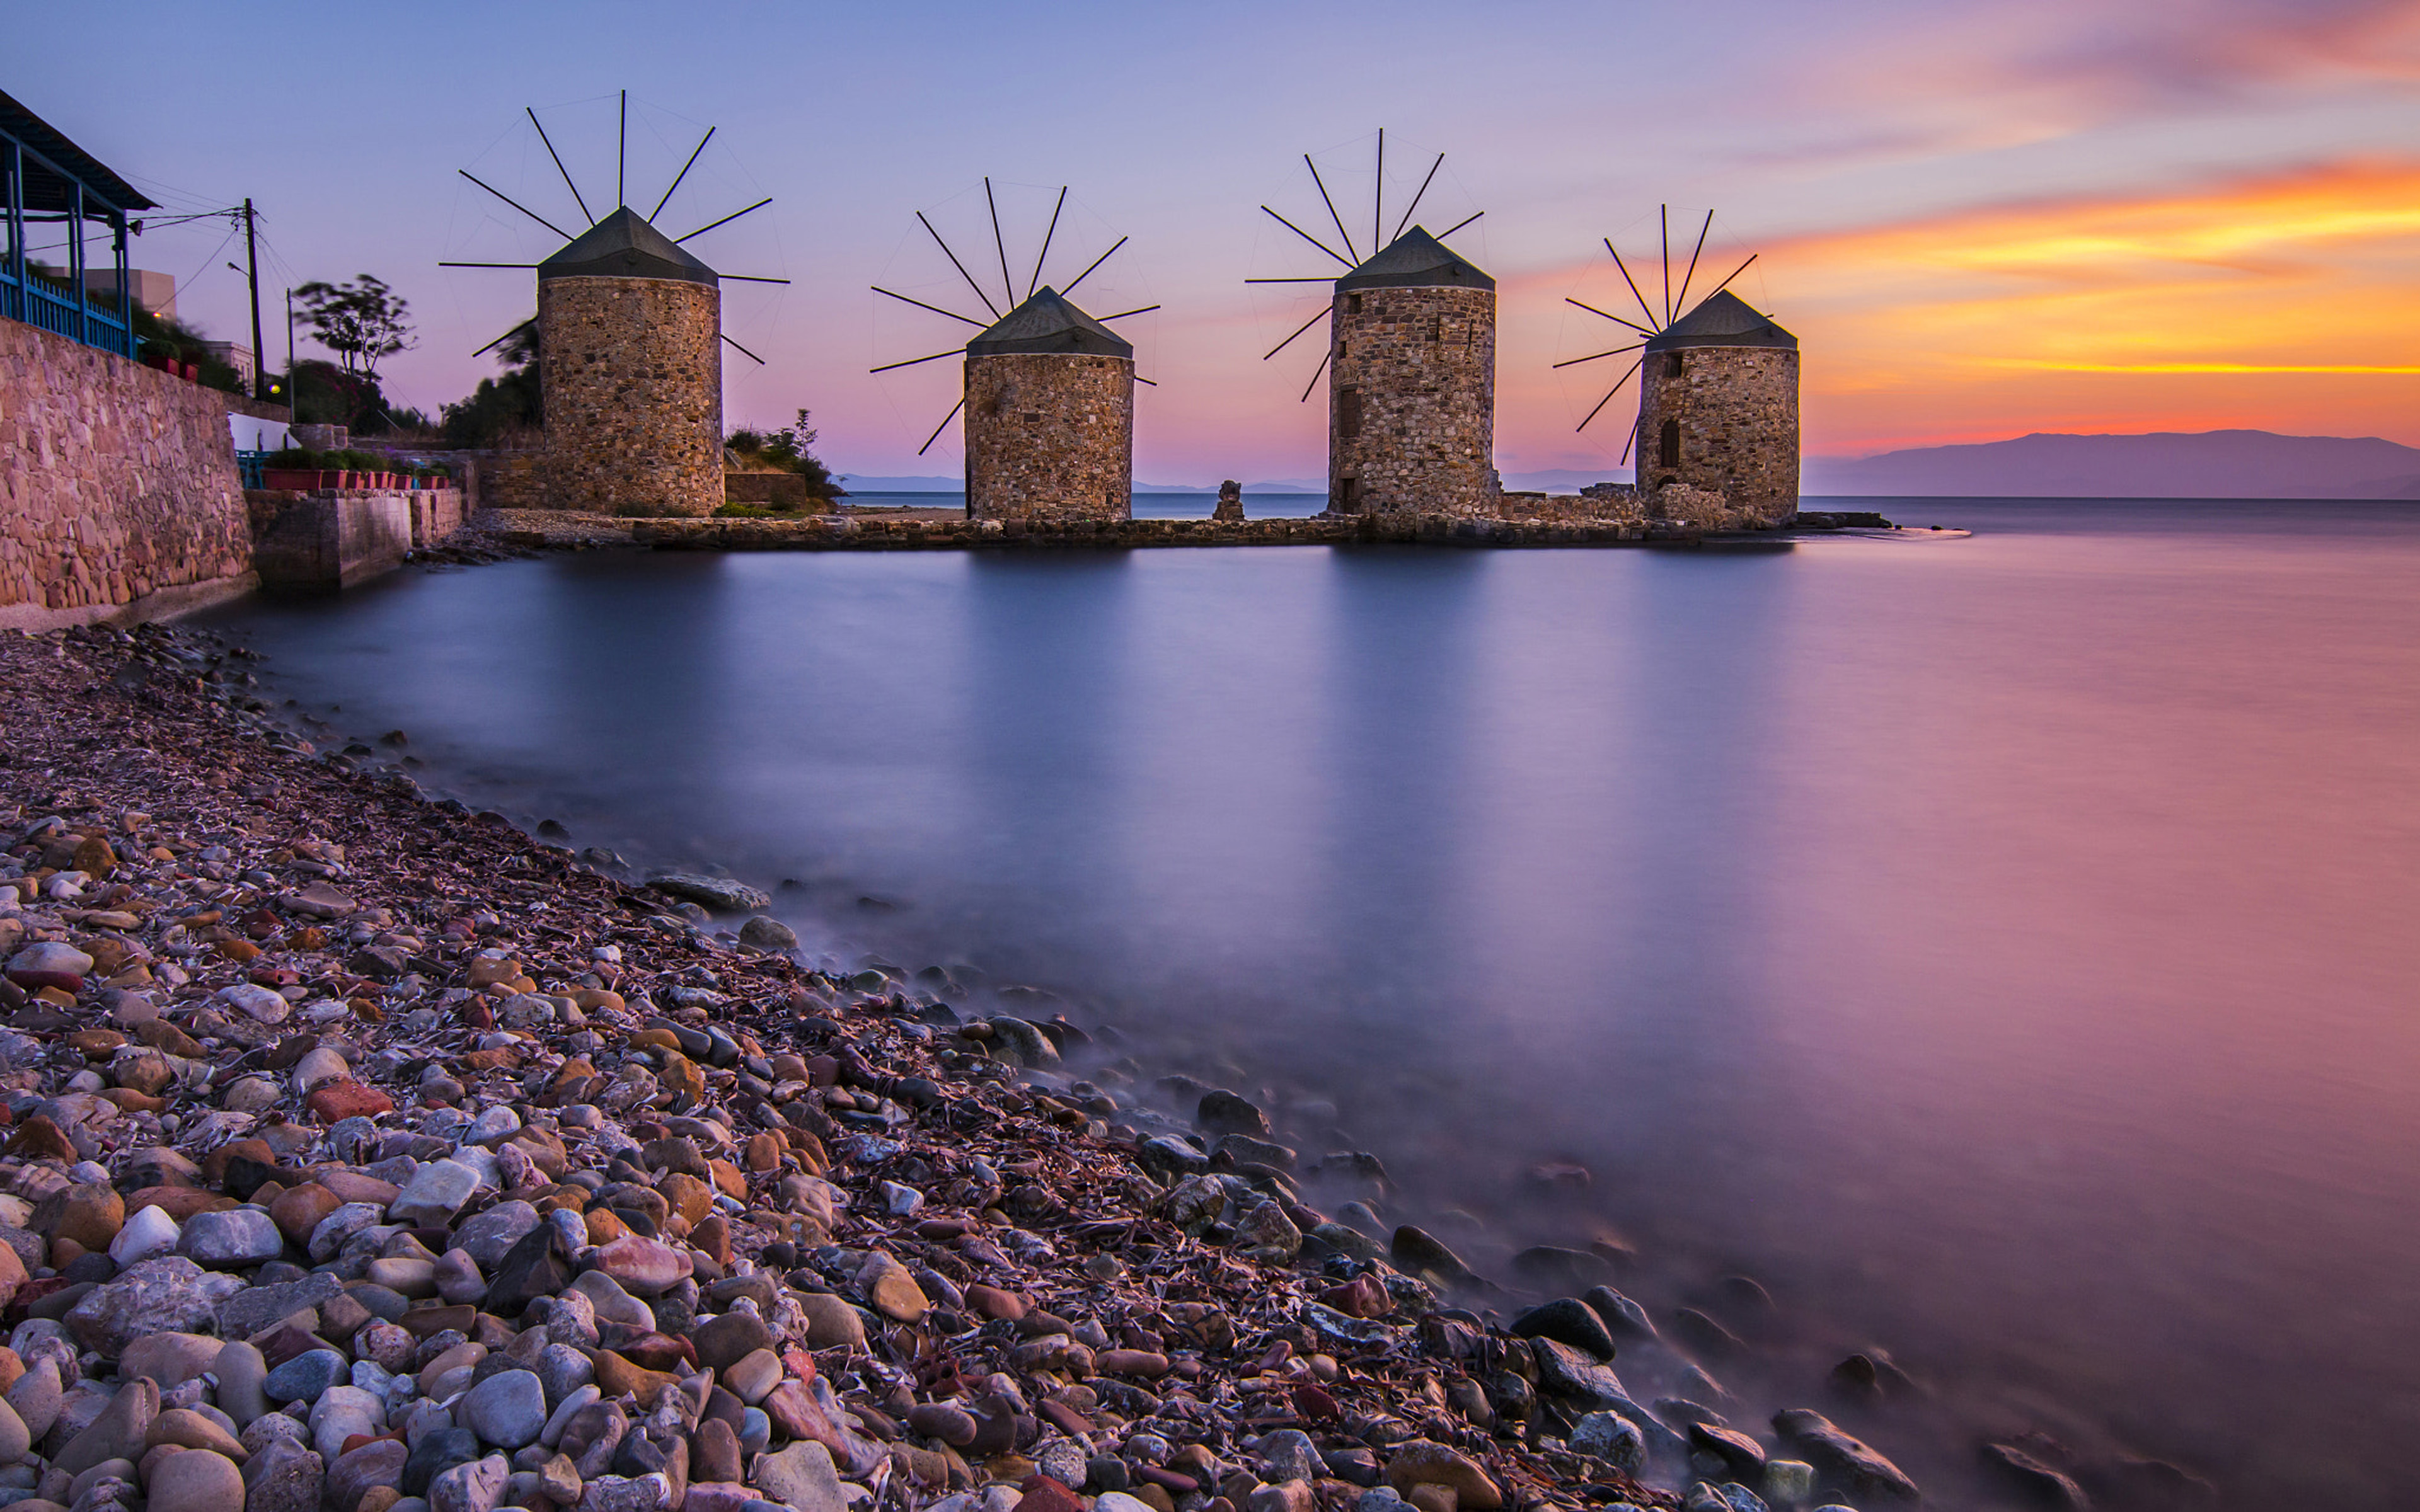 Windmills In Chios Aegean Sea Greece 4k Ultra Hd Desktop Wallpapers For  Computers Laptop Tablet And Mobile Phones : 